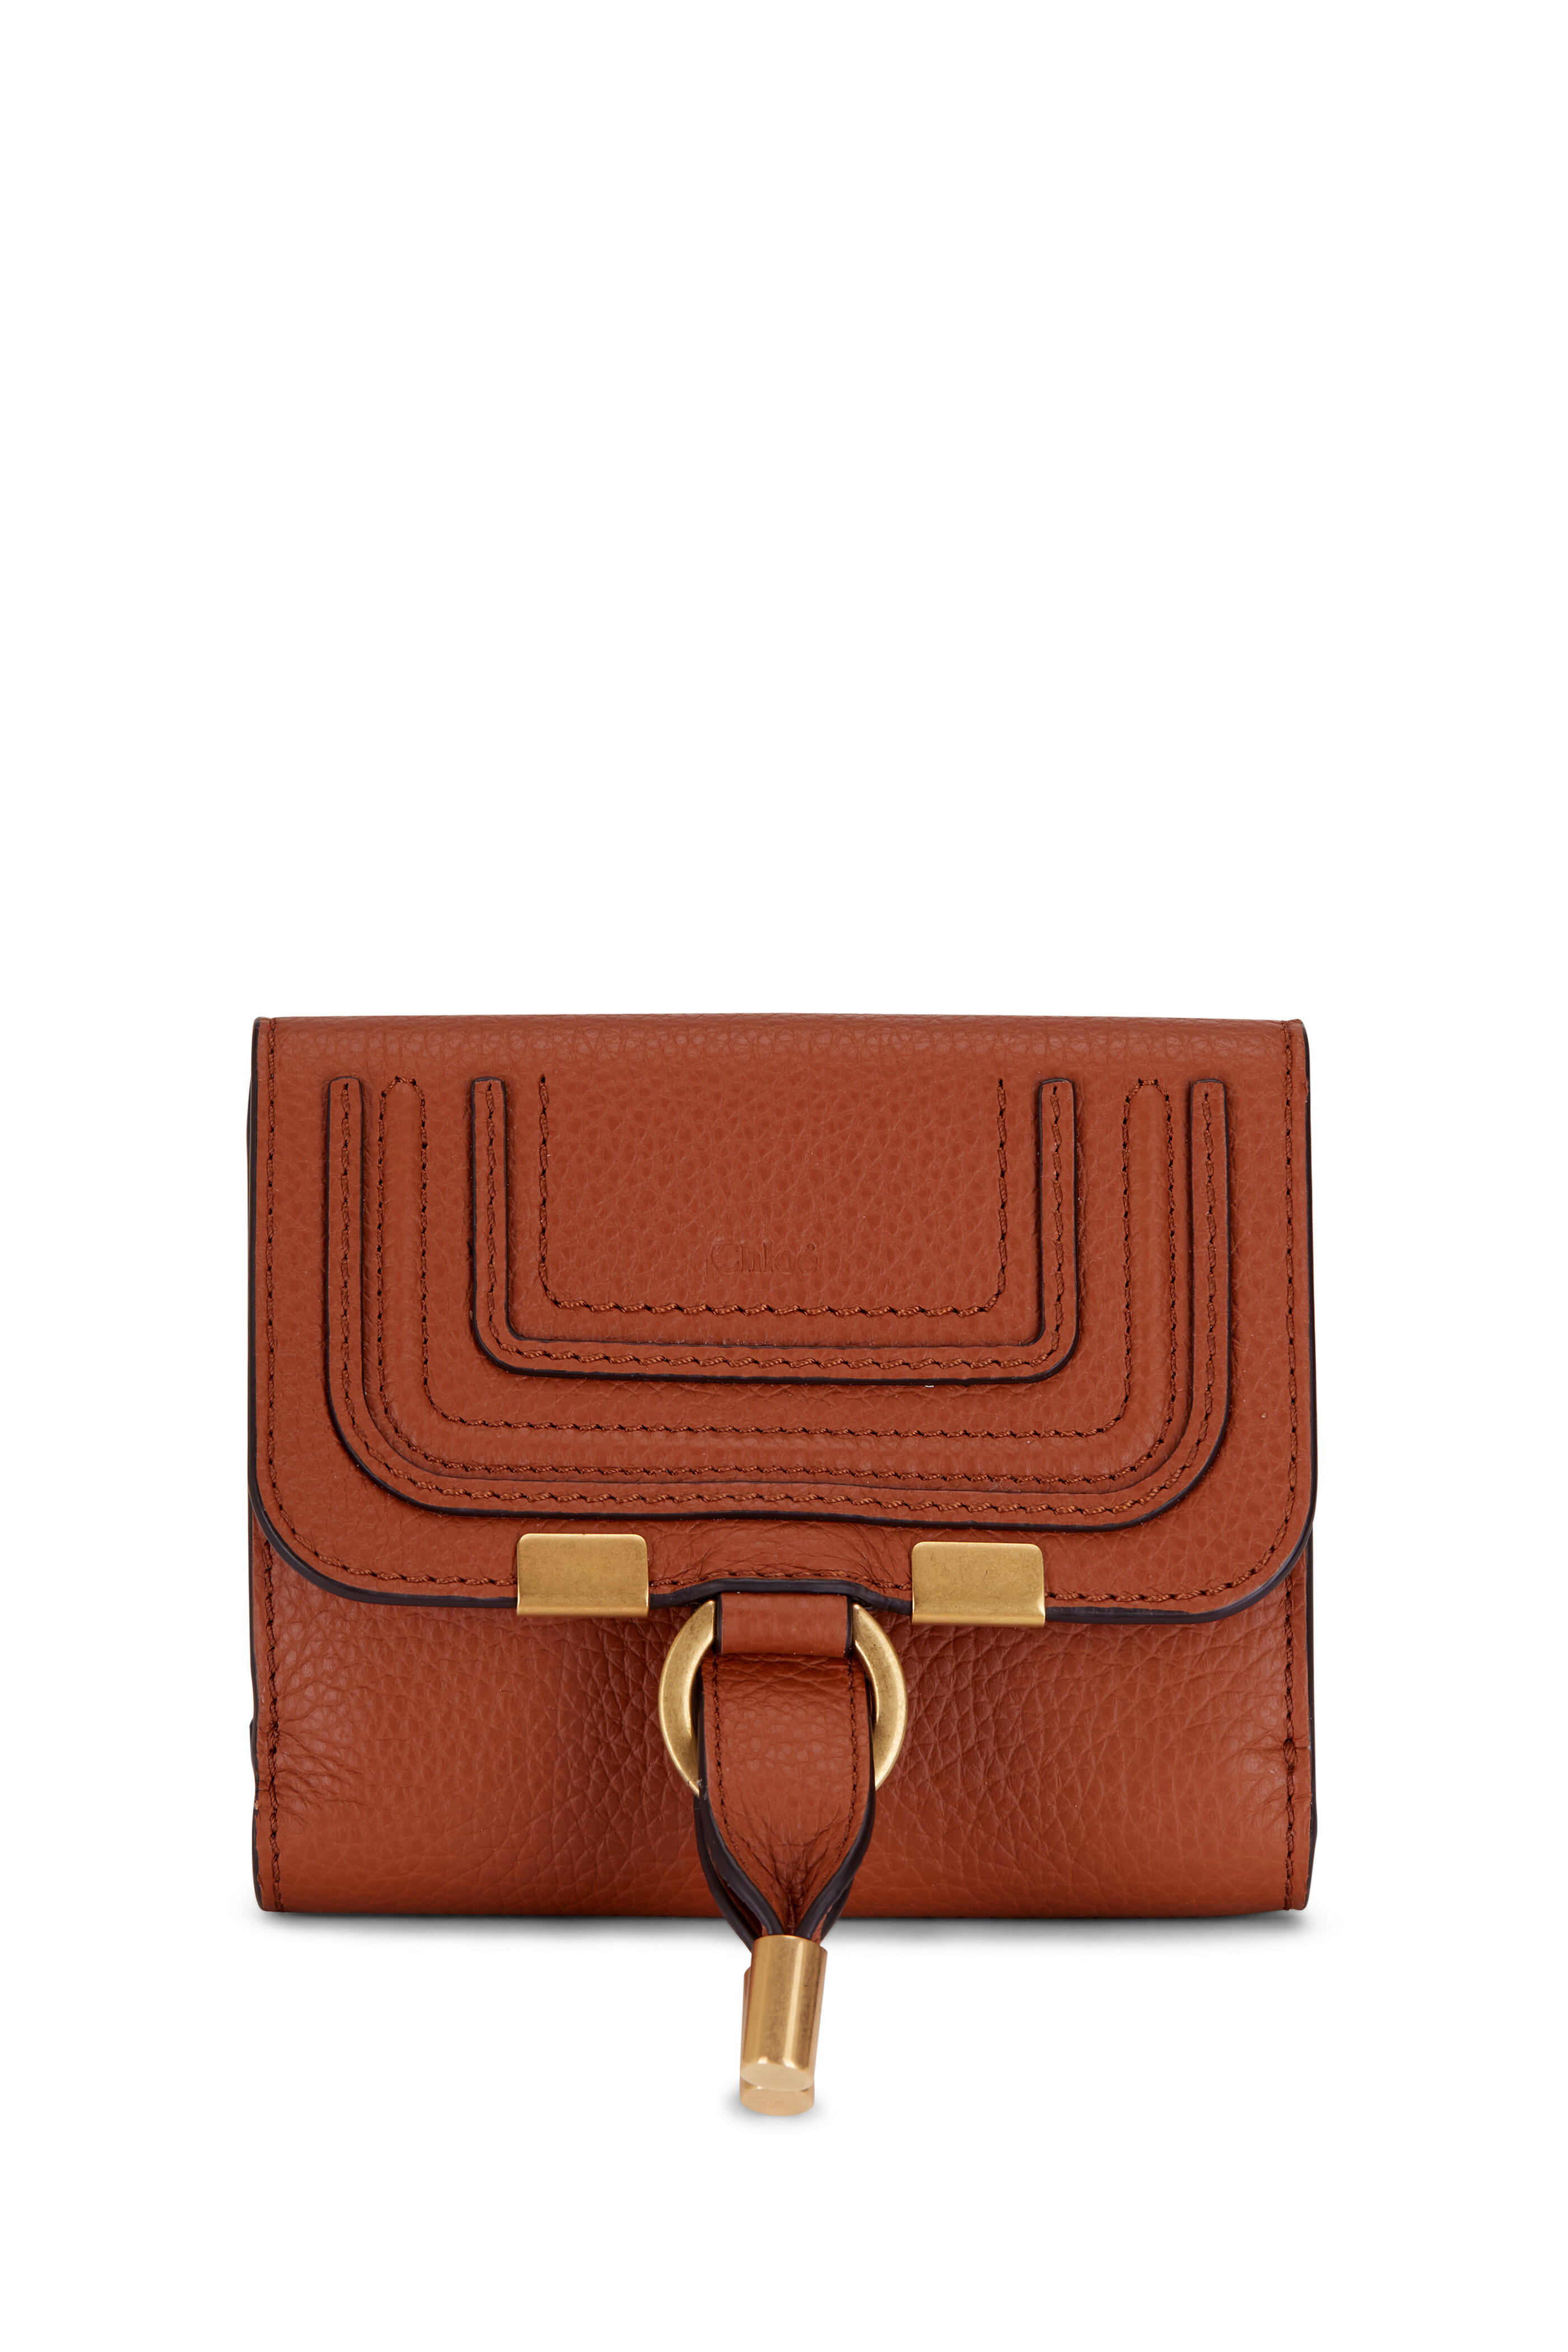 Chloé - Marcie Tan Leather Square Wallet | Mitchell Stores